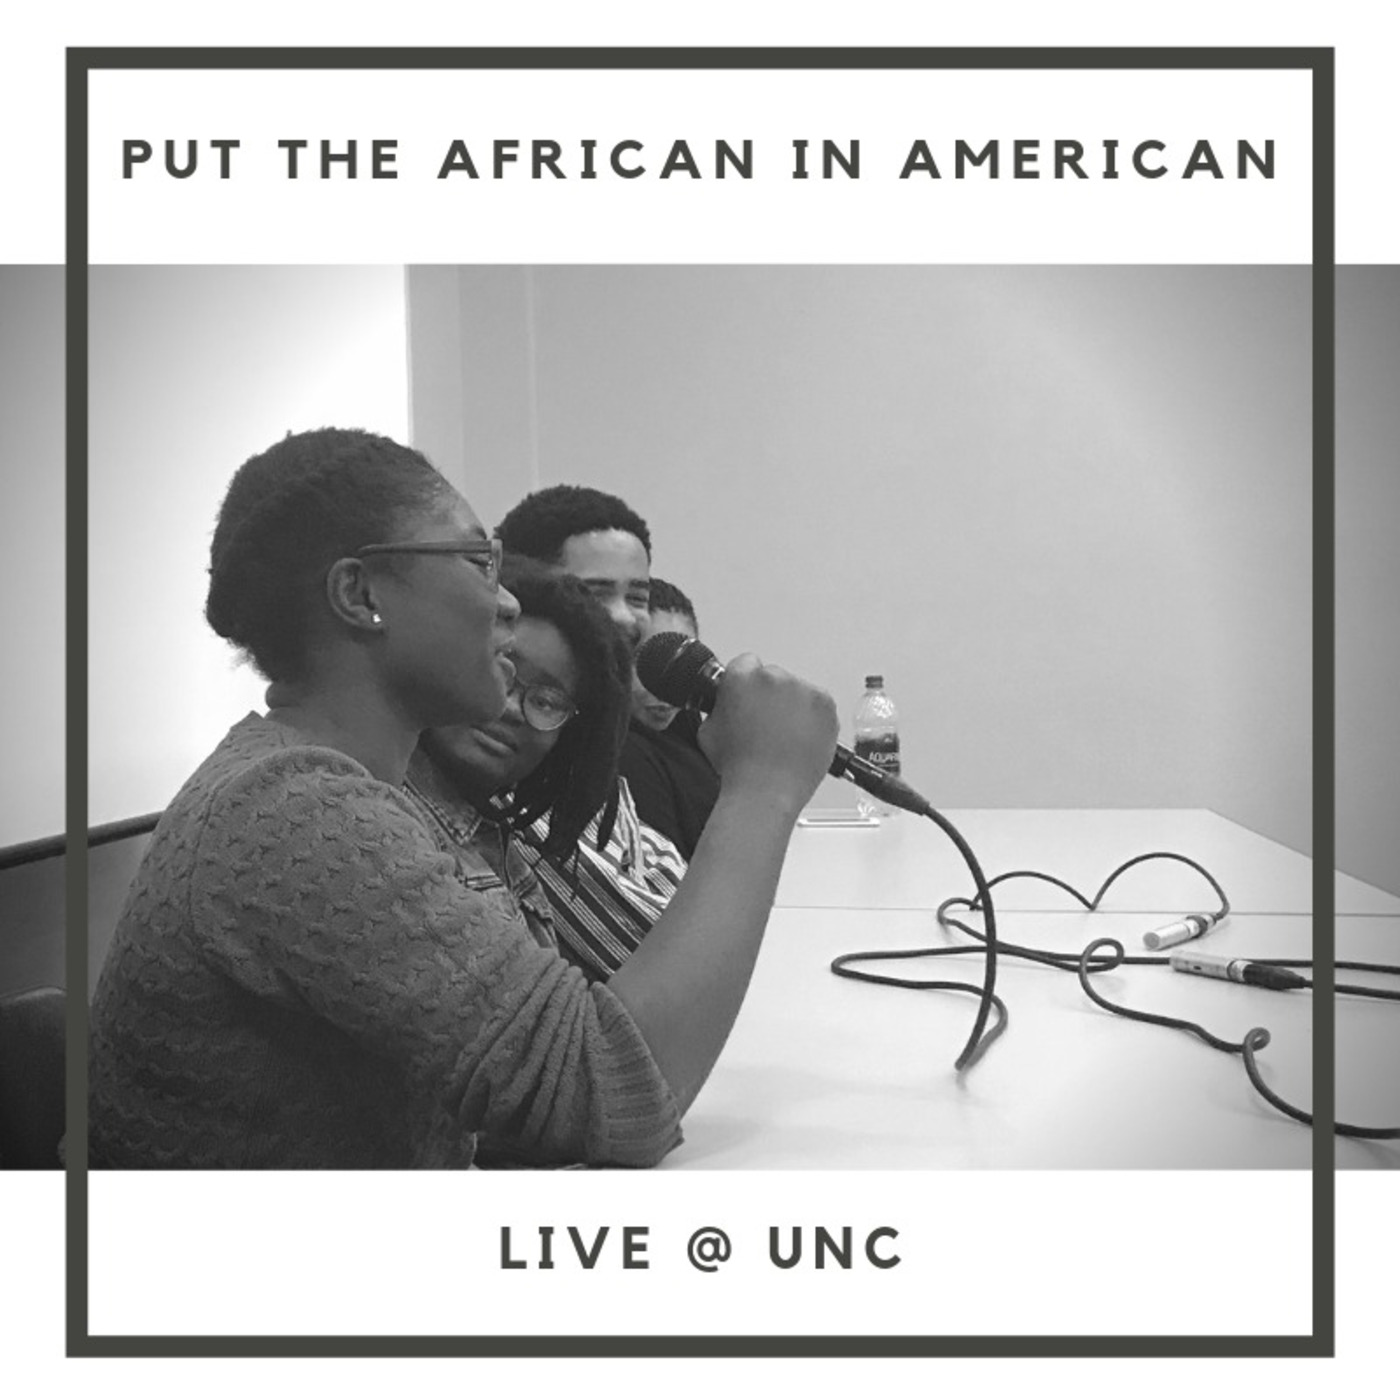 Put the African in American: Live @ UNC